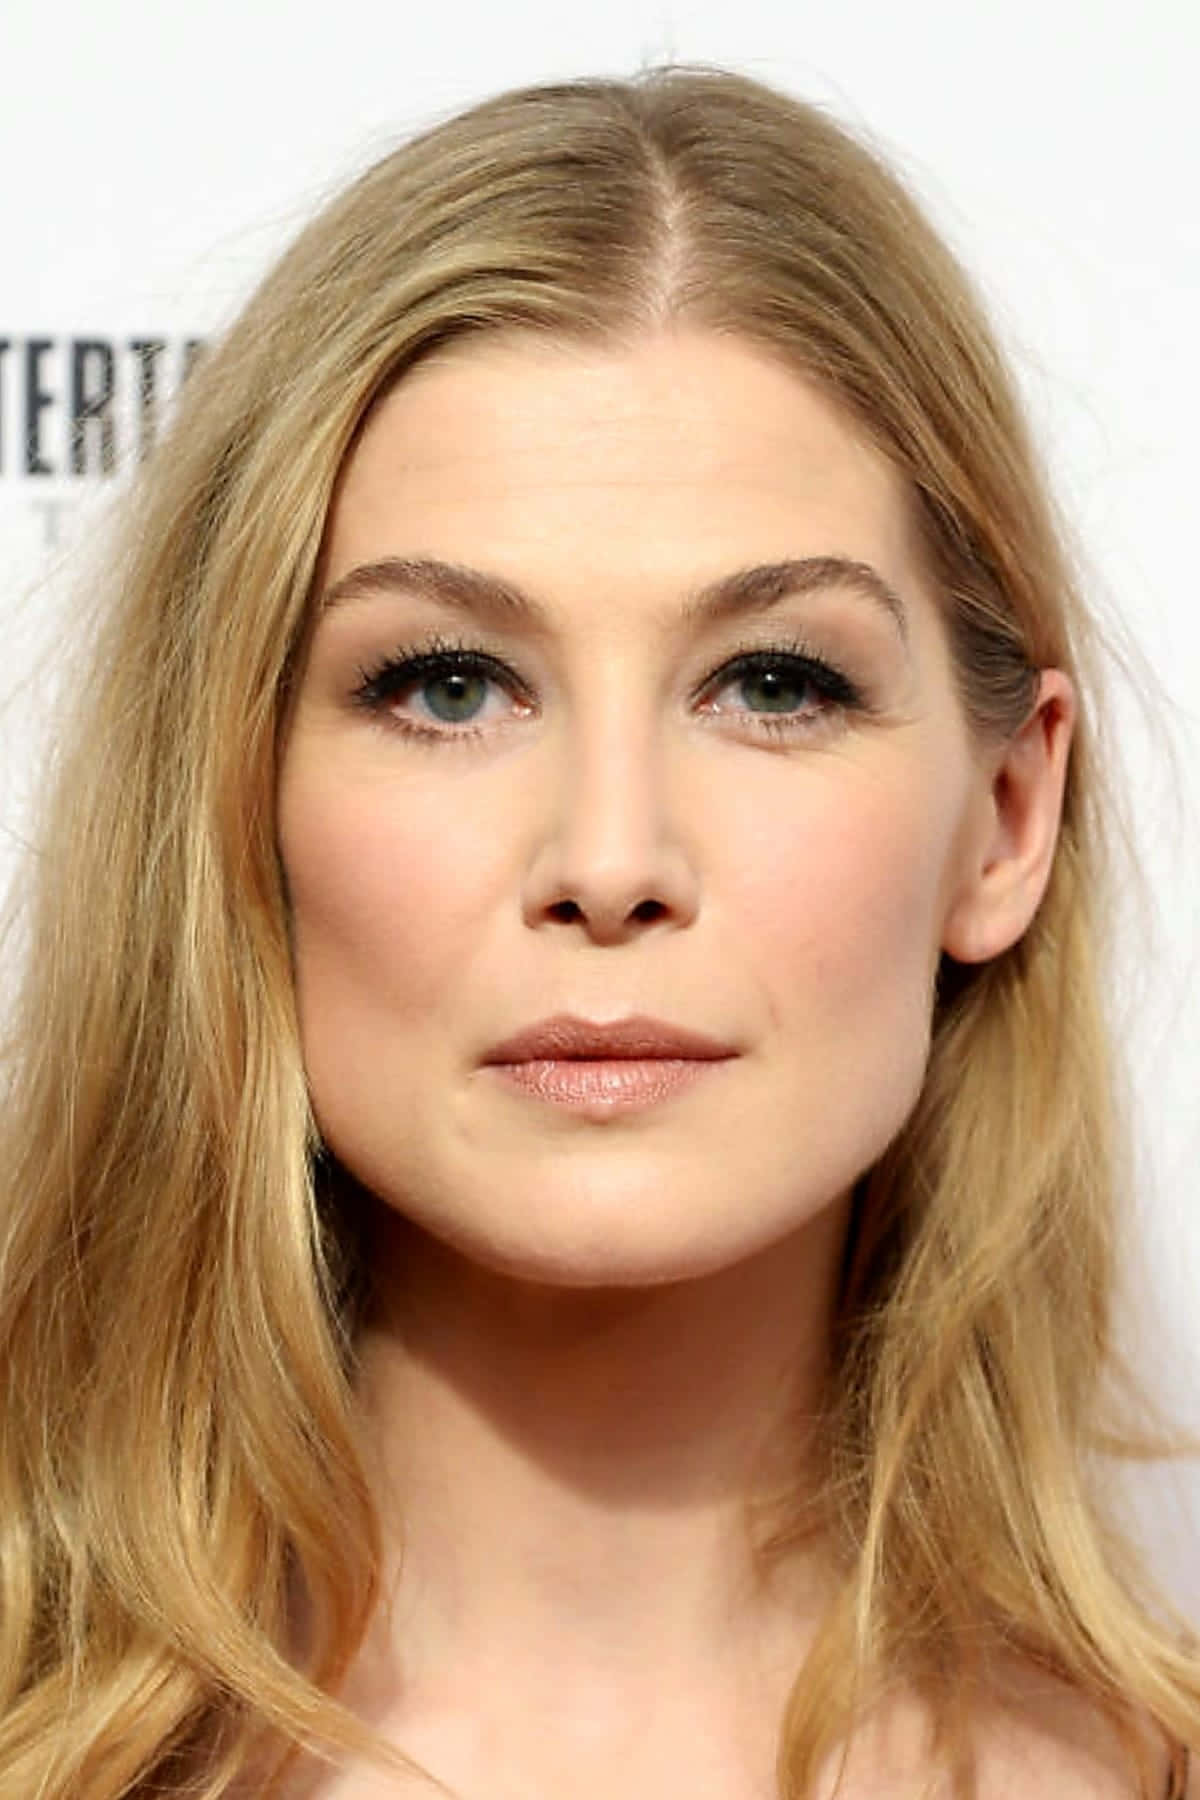 Rosamund Pike At A Red Carpet Event Wallpaper